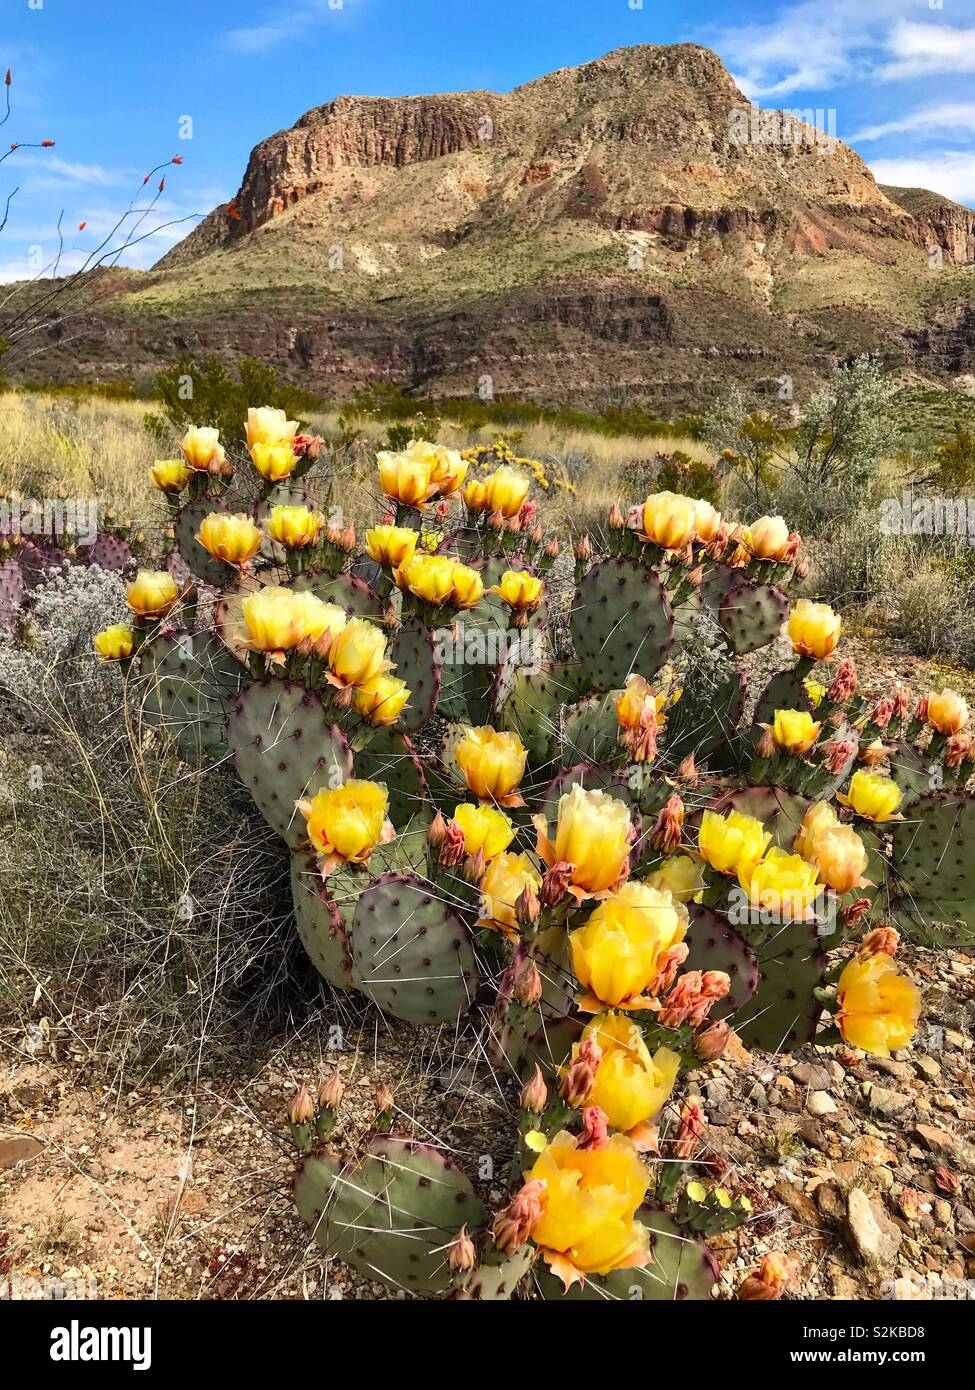 Prickly pear cactus blooming in Big Bend National Park Stock Photo